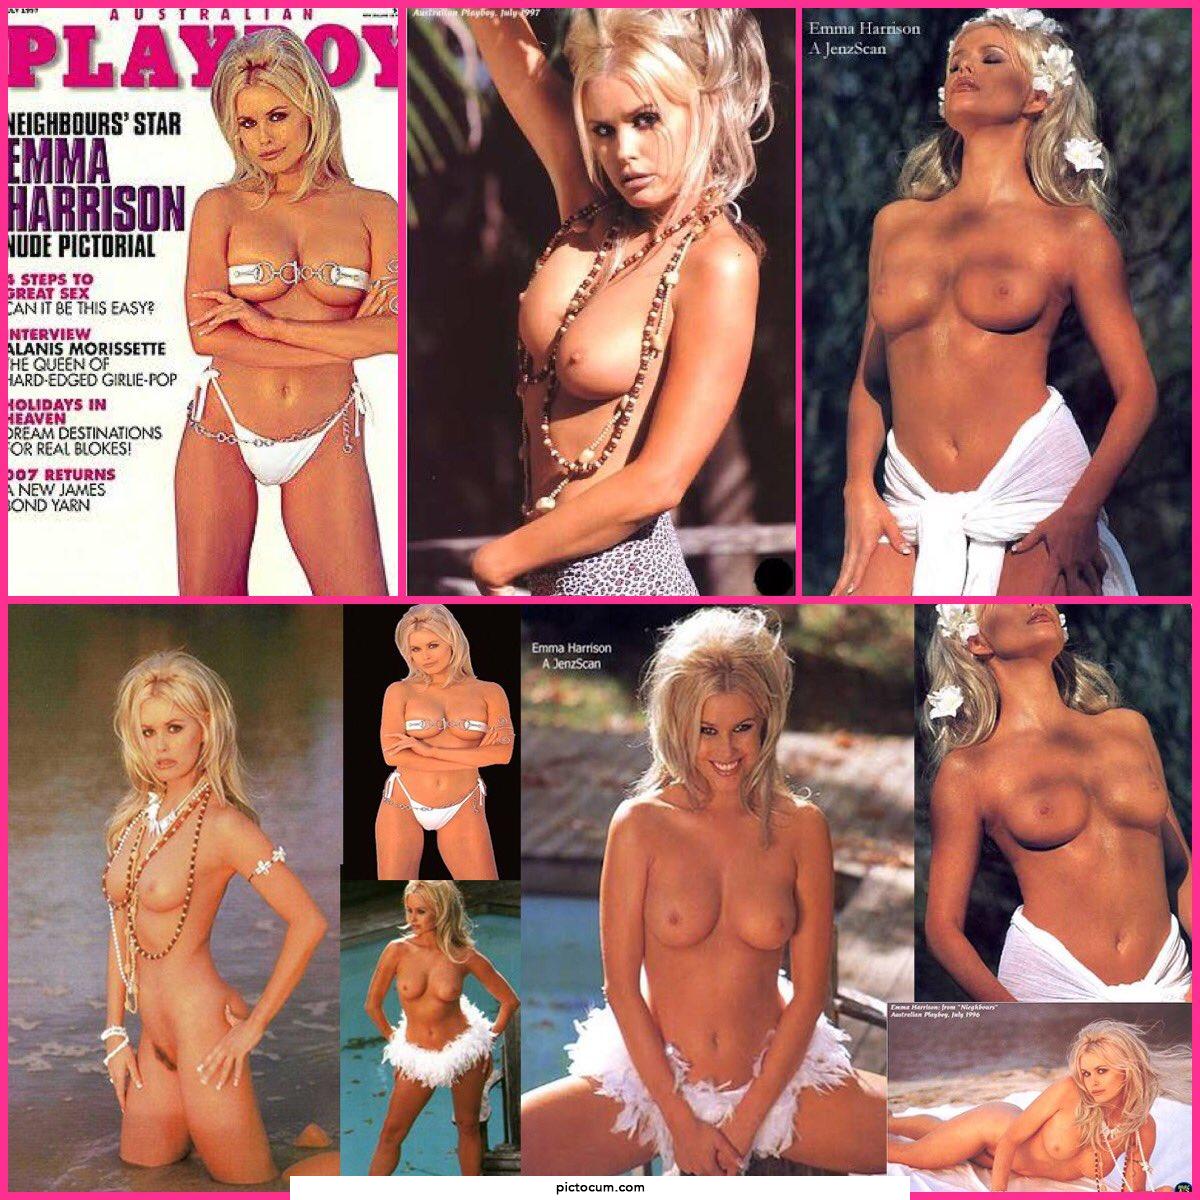 Another Aussie babe Emma Harrison caught my attention on more than one occasion back in the 1990's